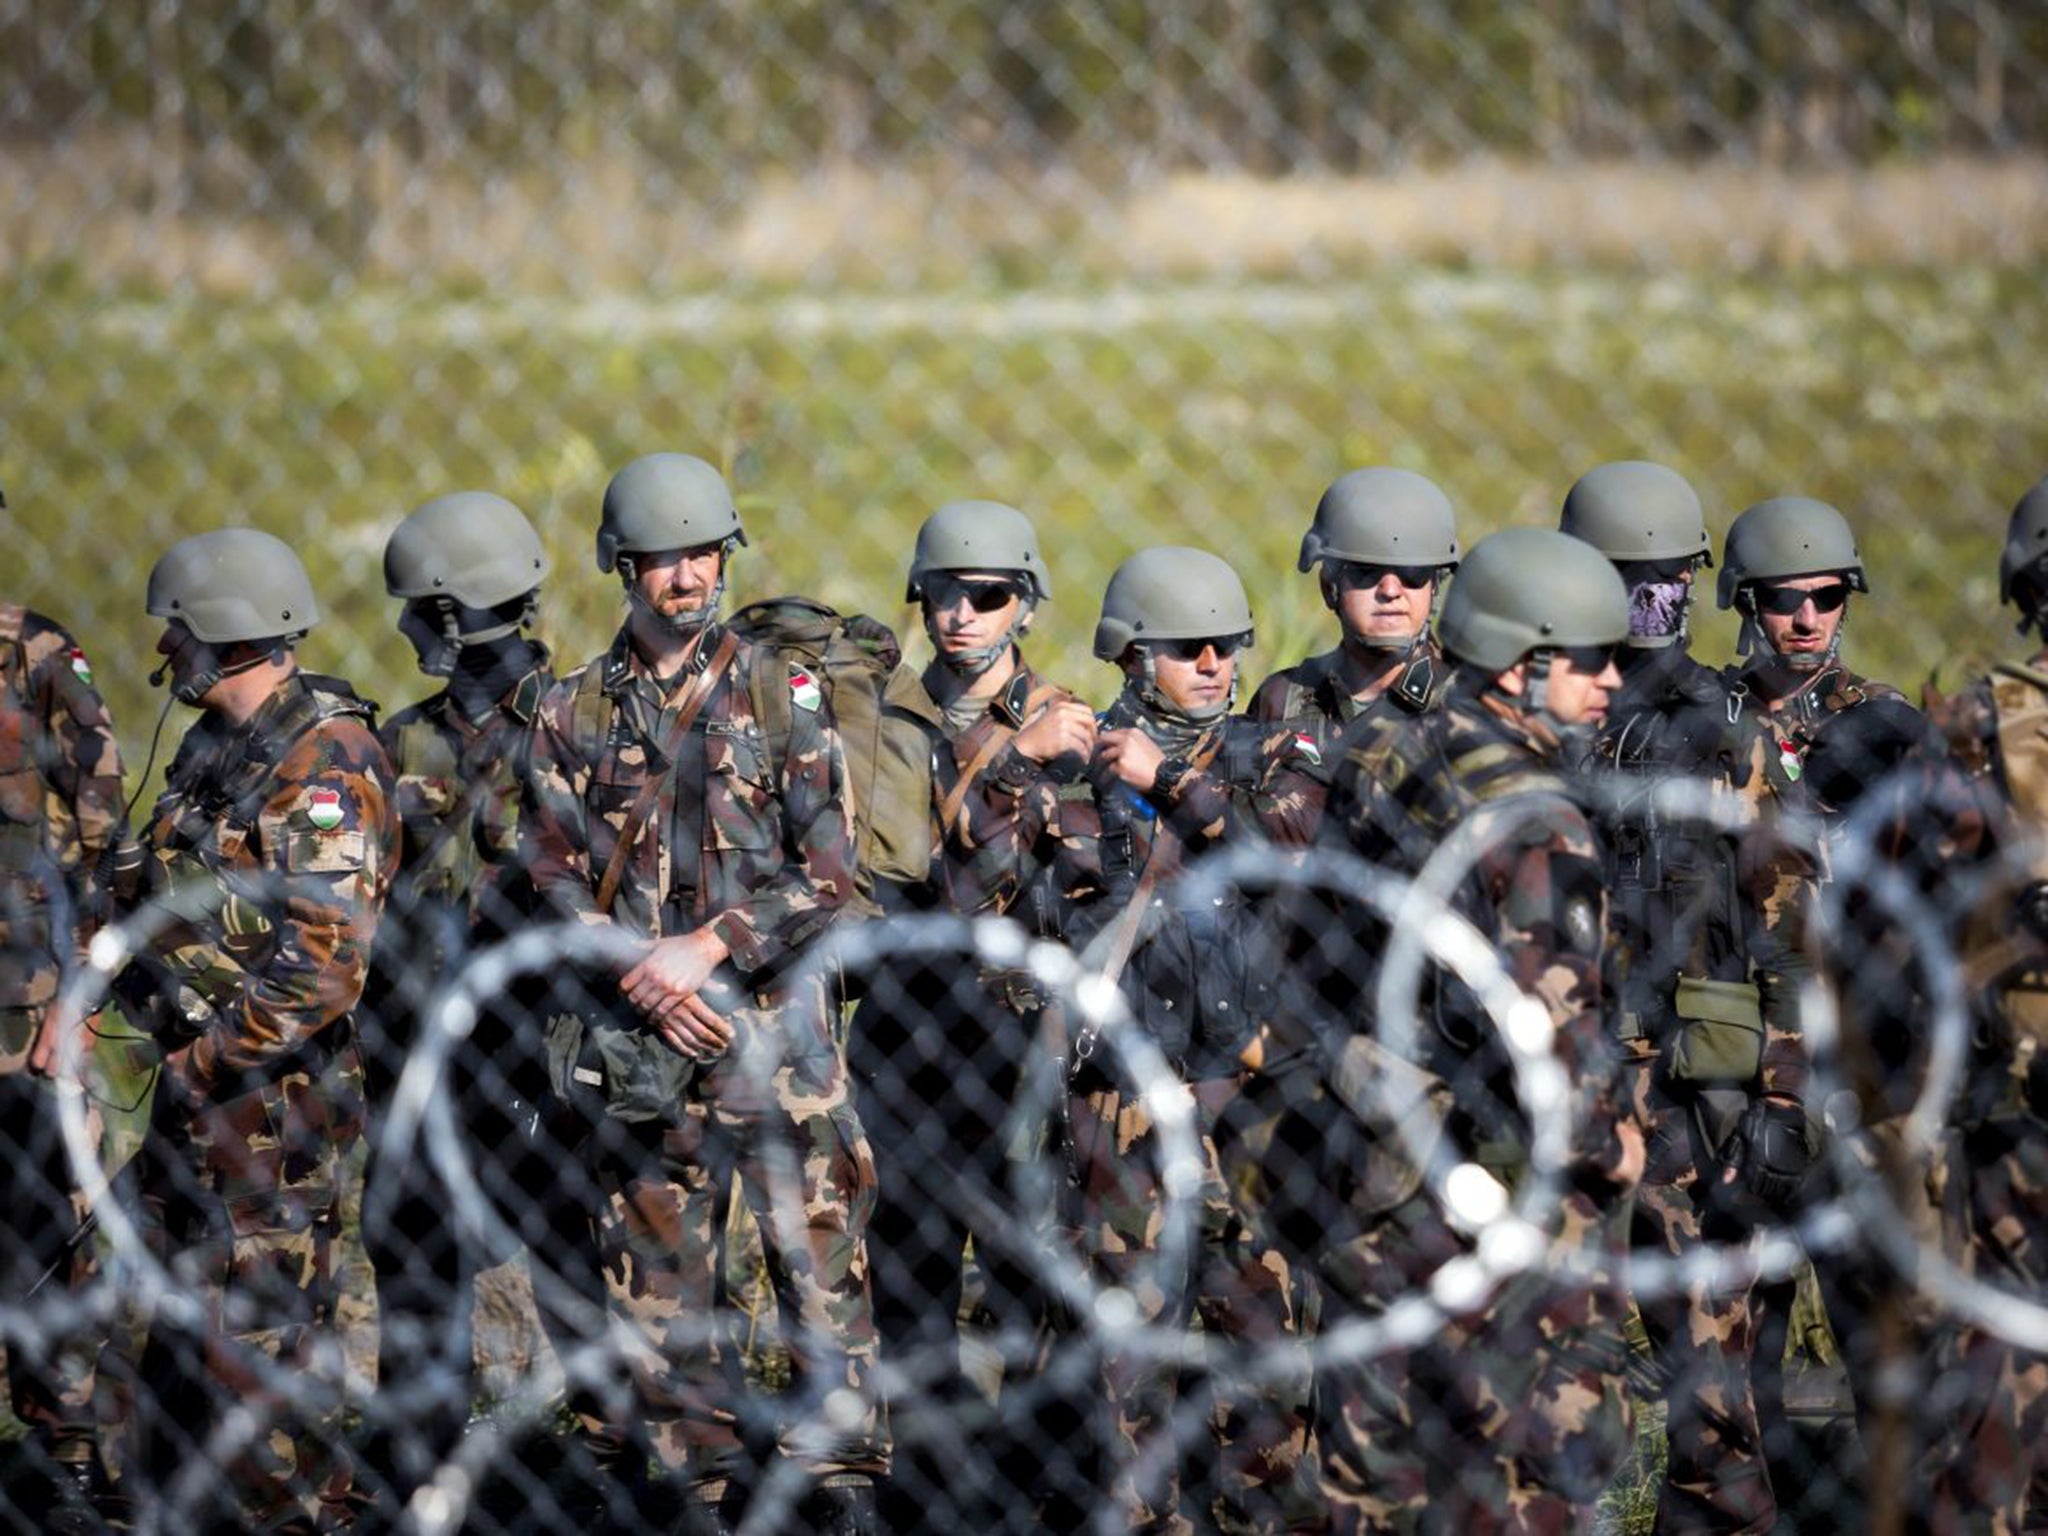 Soldiers at the border between Hungary and Serbia, near Roszke